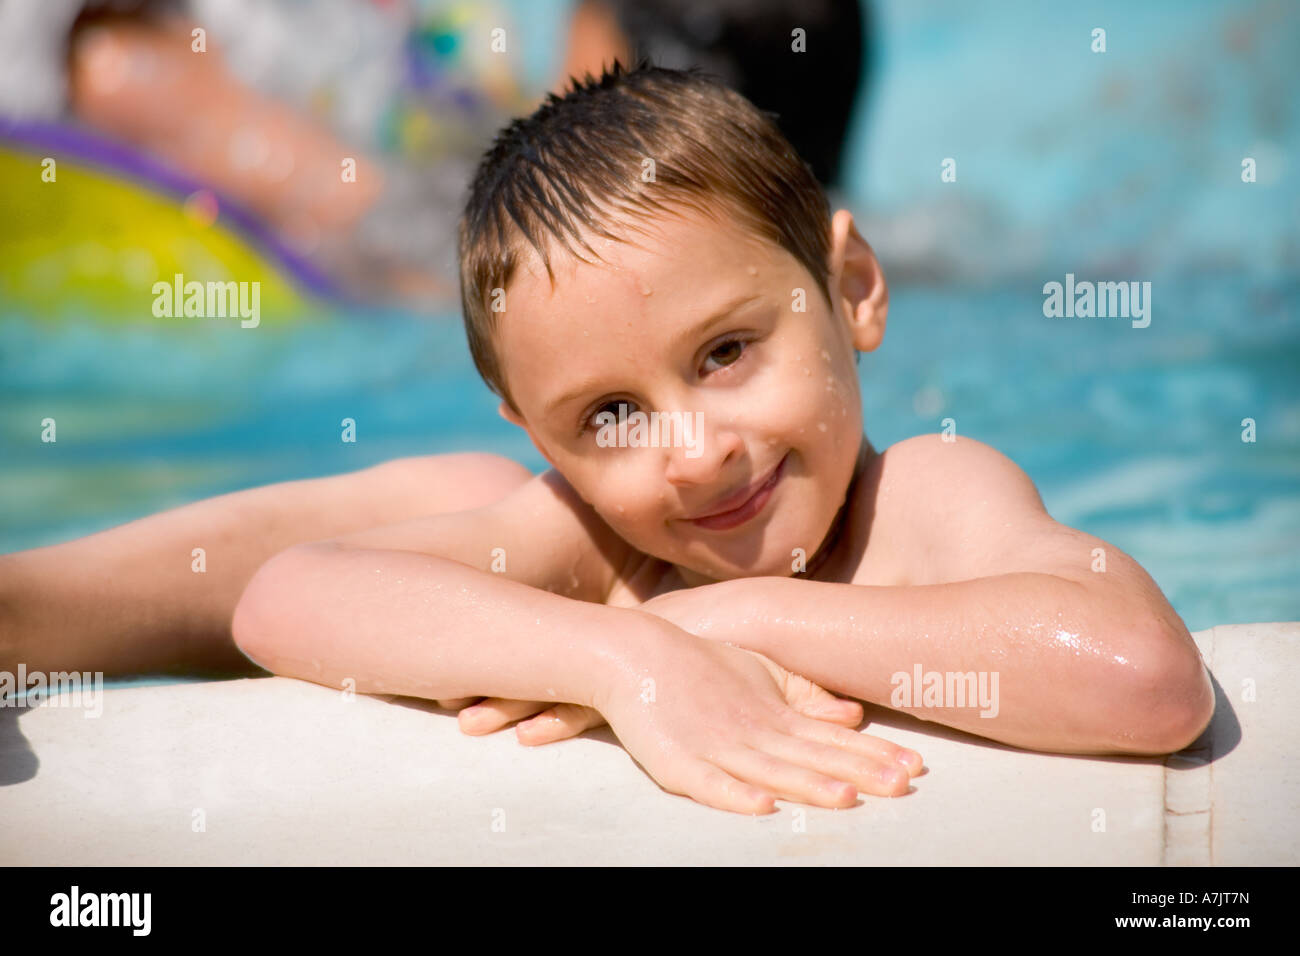 wet Caucasian boy in a swimming pool resting at poolside smiling at the camera with beads of water on his face Stock Photo